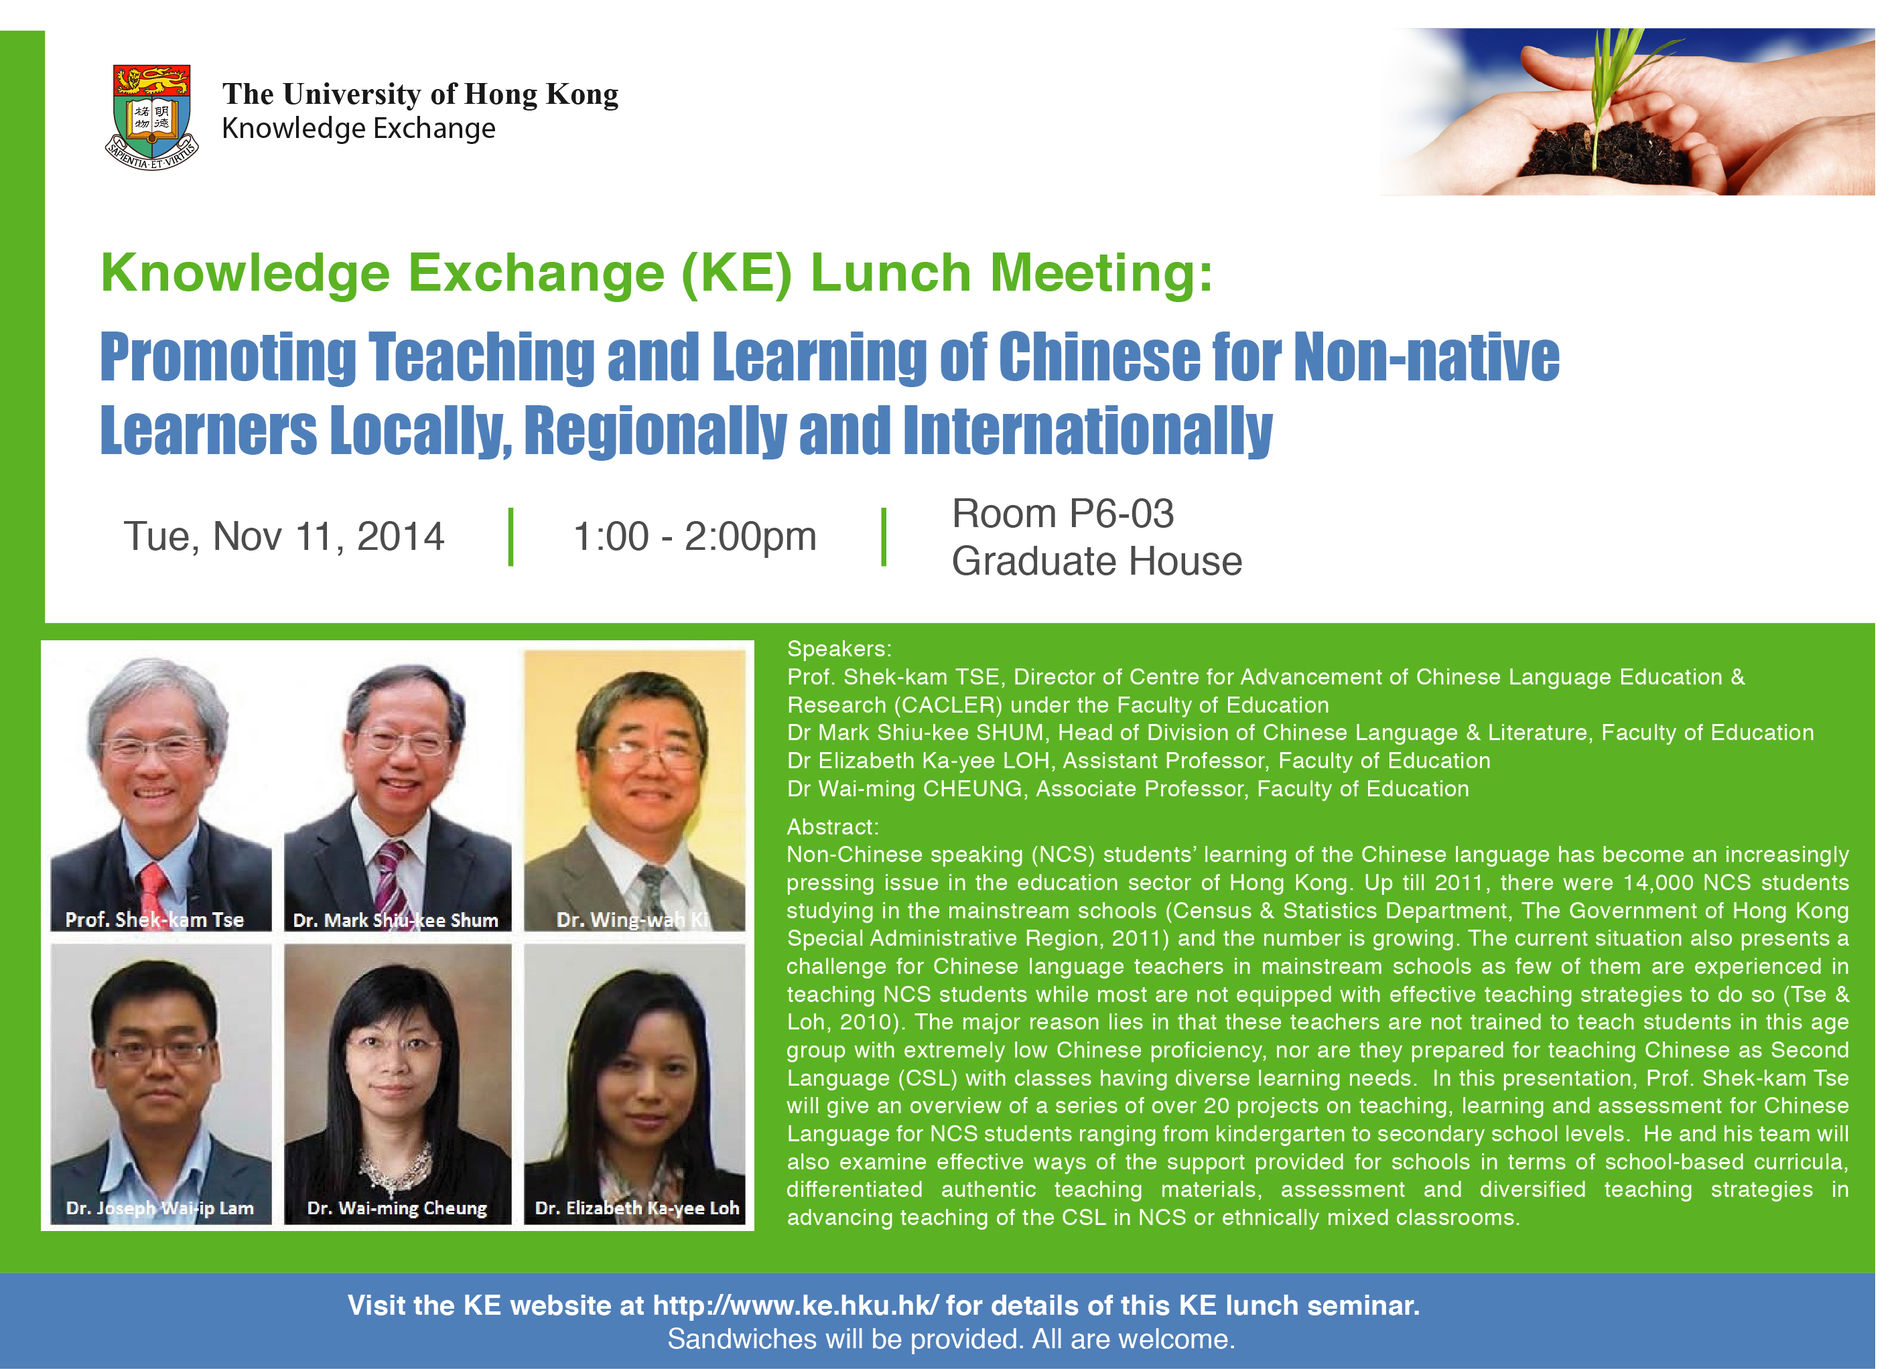 KE lunch meeting - Promoting Teaching and Learning of Chinese for Non-native Learners Locally, Regionally and Internationally